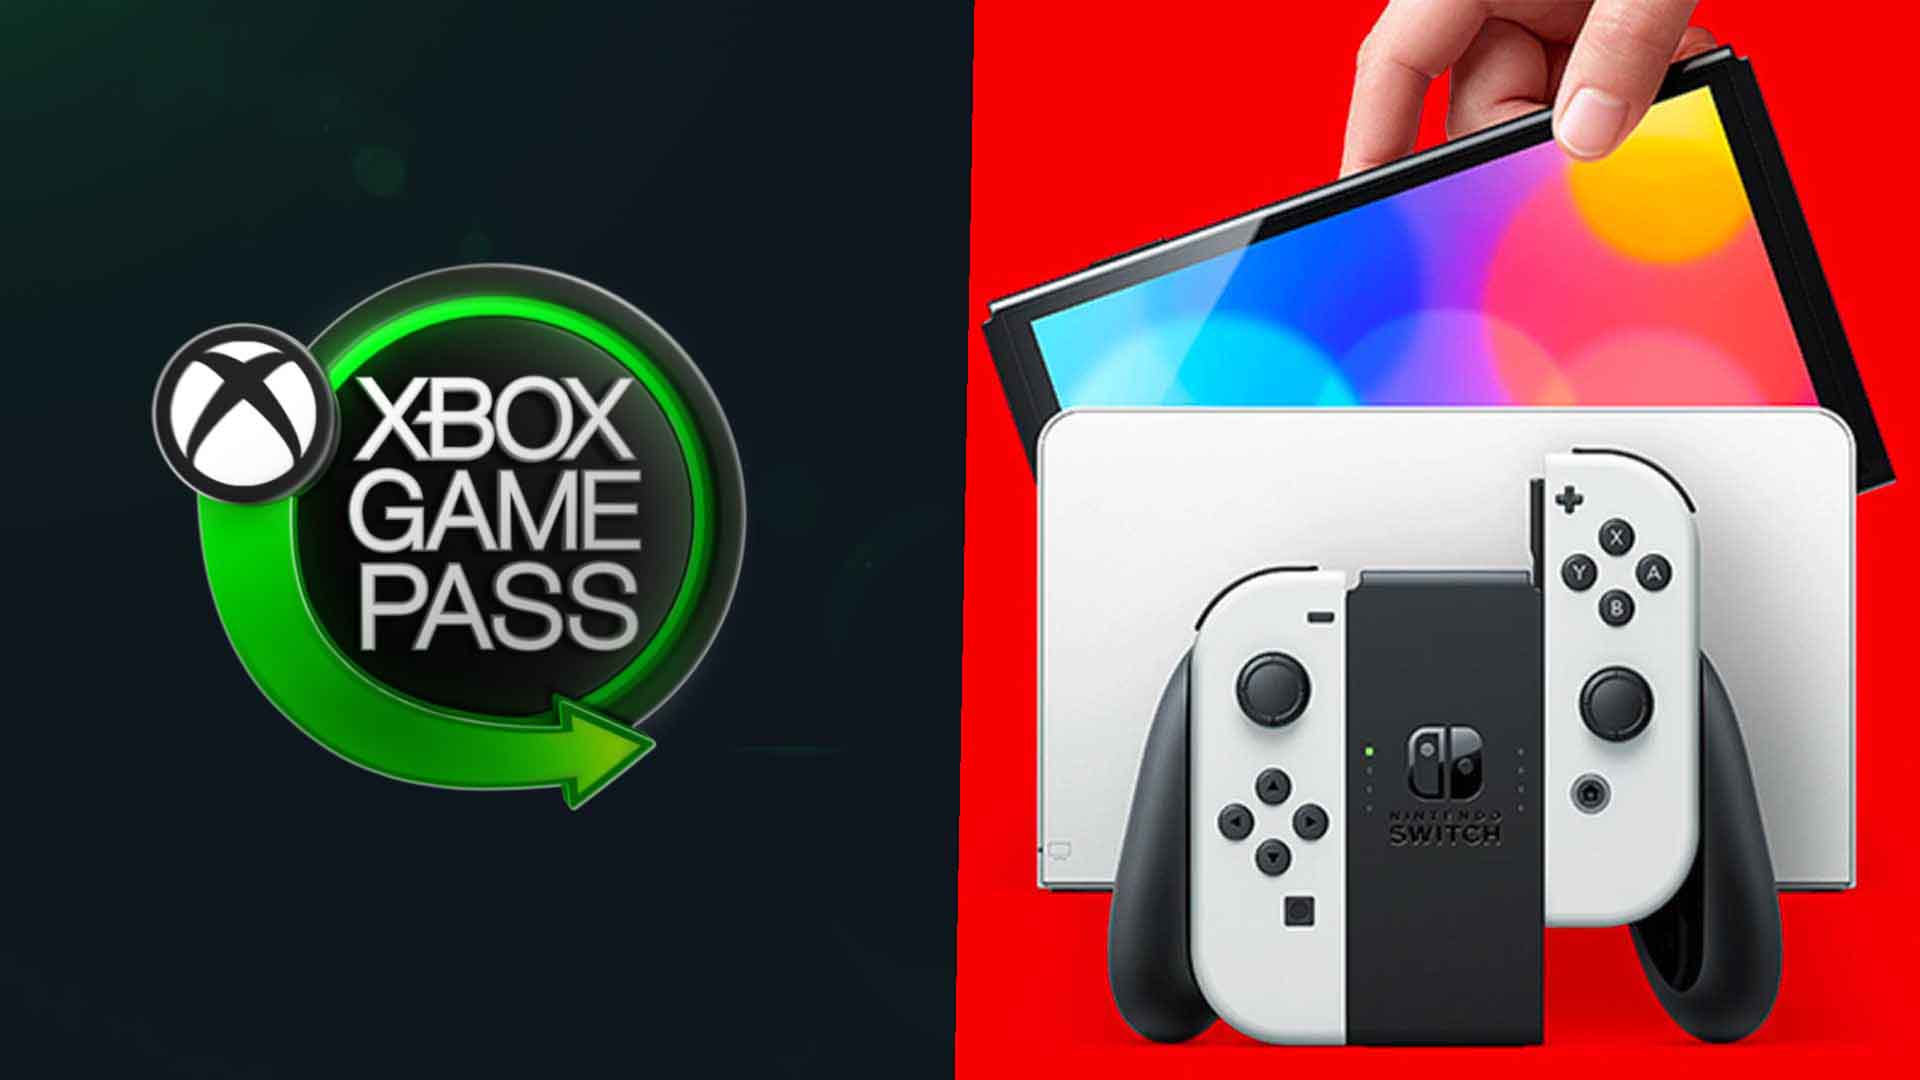 Phil Spencer Comments on Plans to Bring Xbox Game Pass to Nintendo